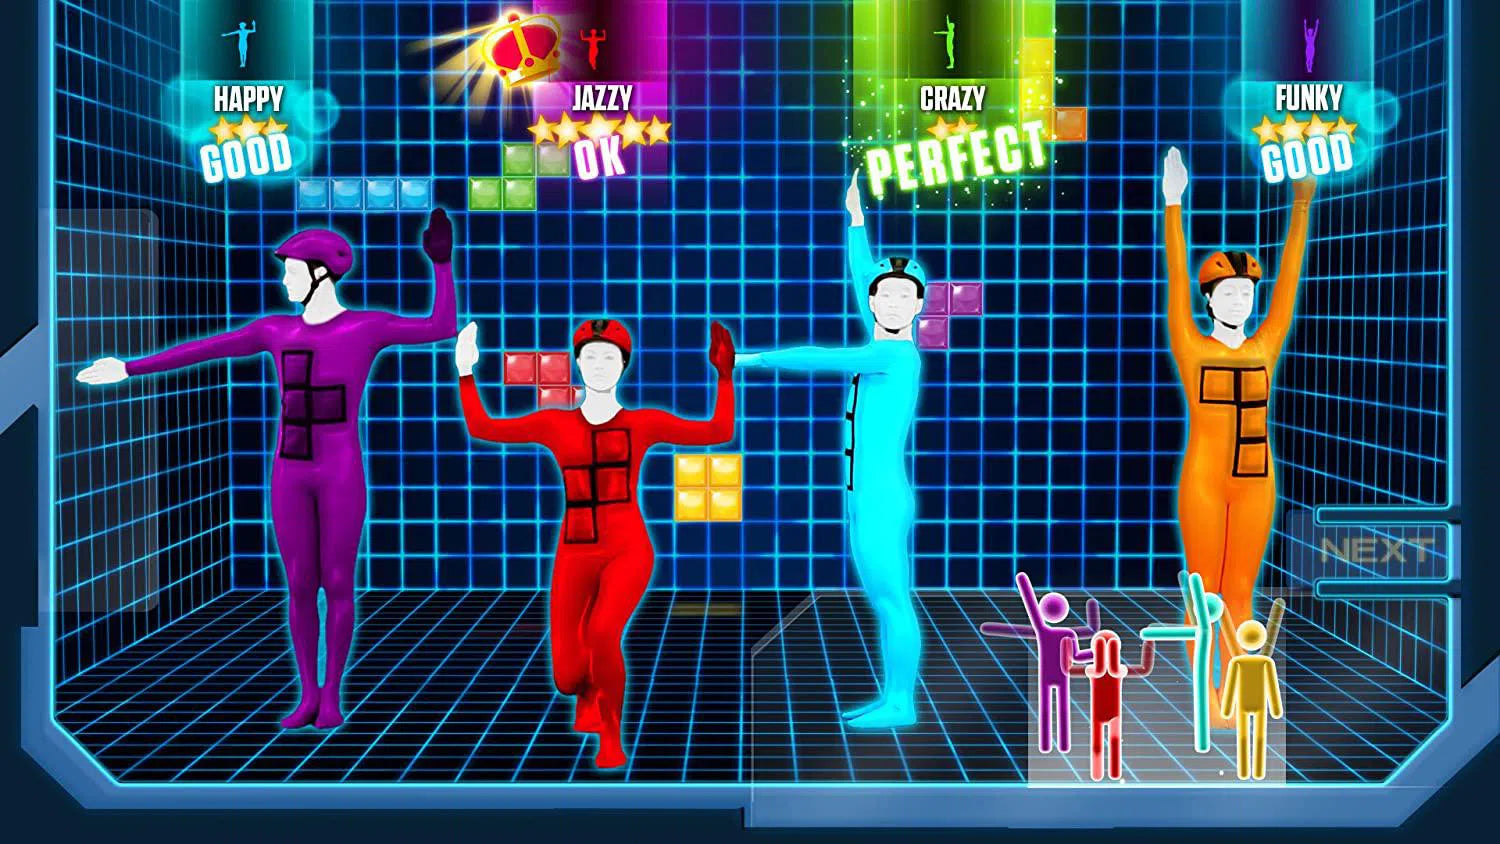 Just Dance 2015 - PlayStation 3